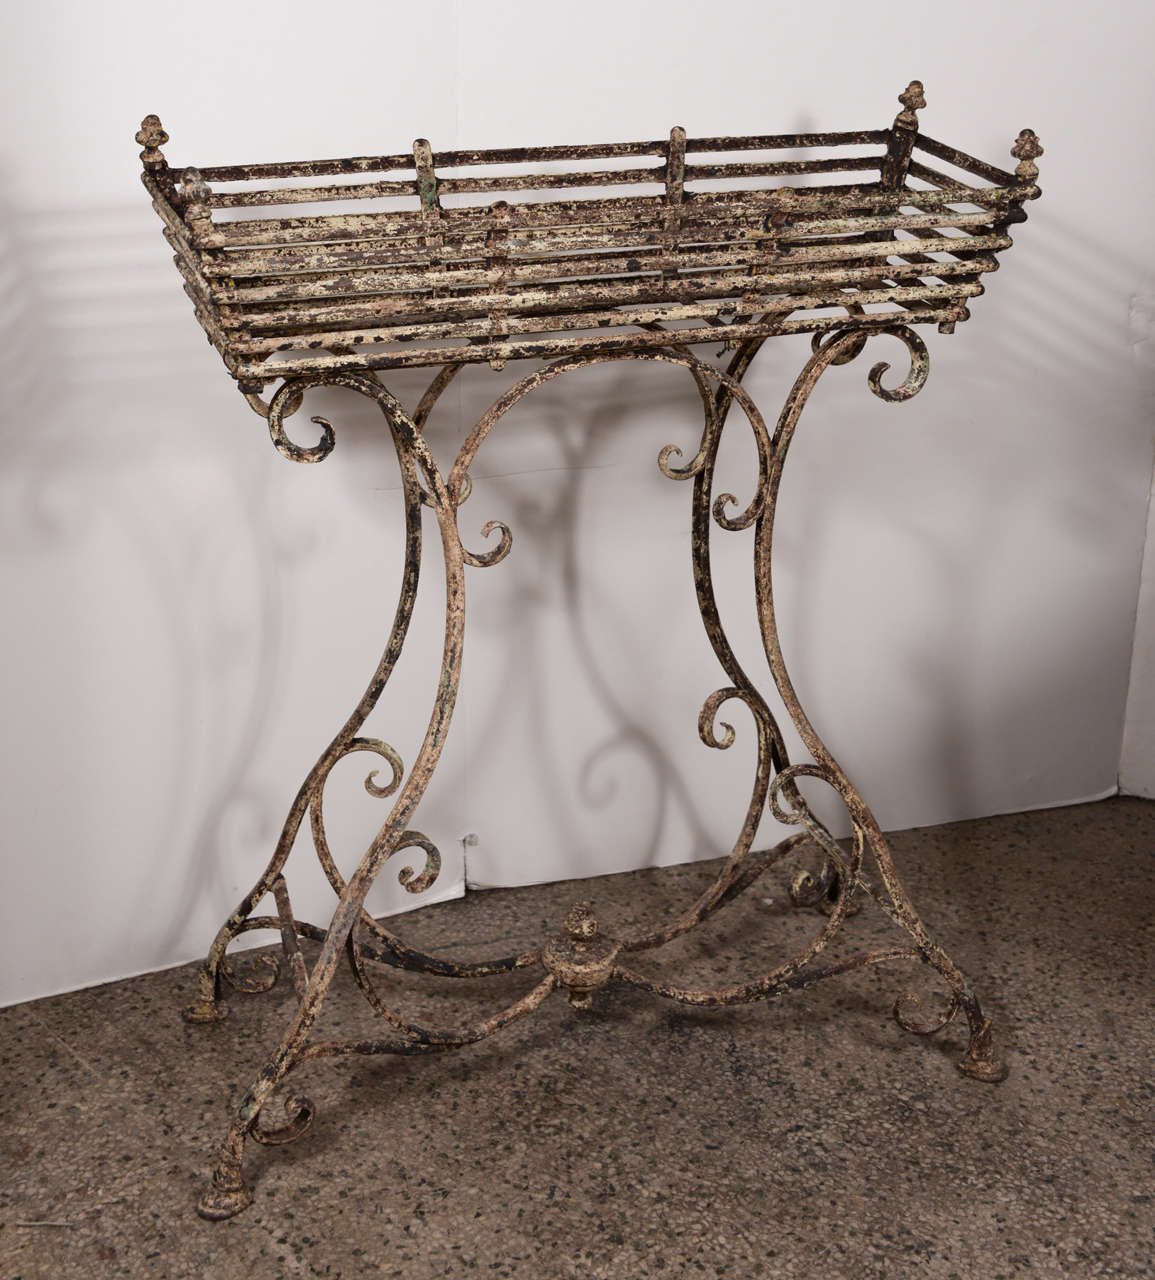 Iron jardinière from France. Manufactured by Arras.